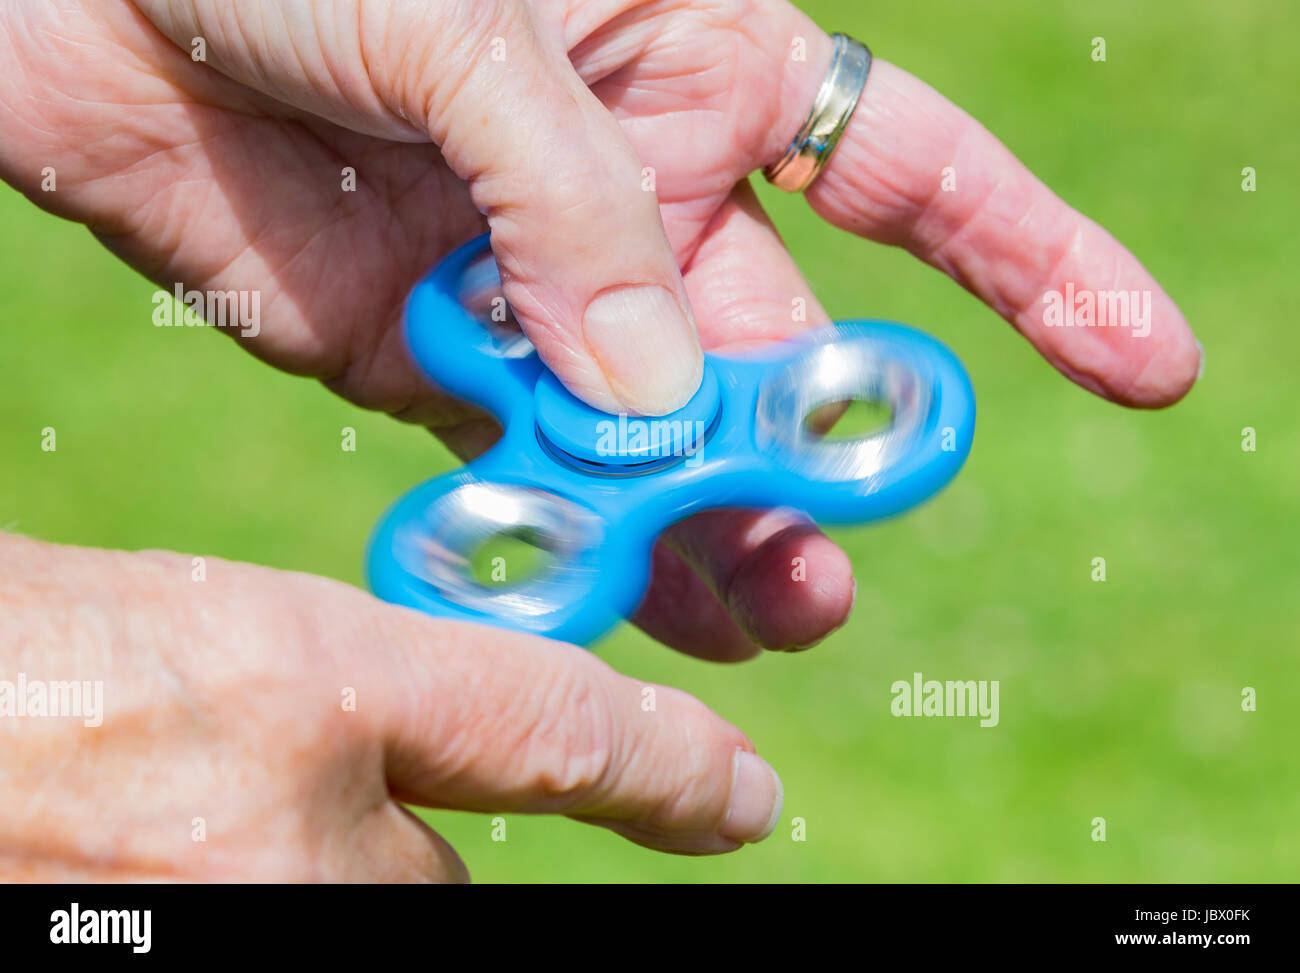 Playing with a fidget spinner. Stock Photo